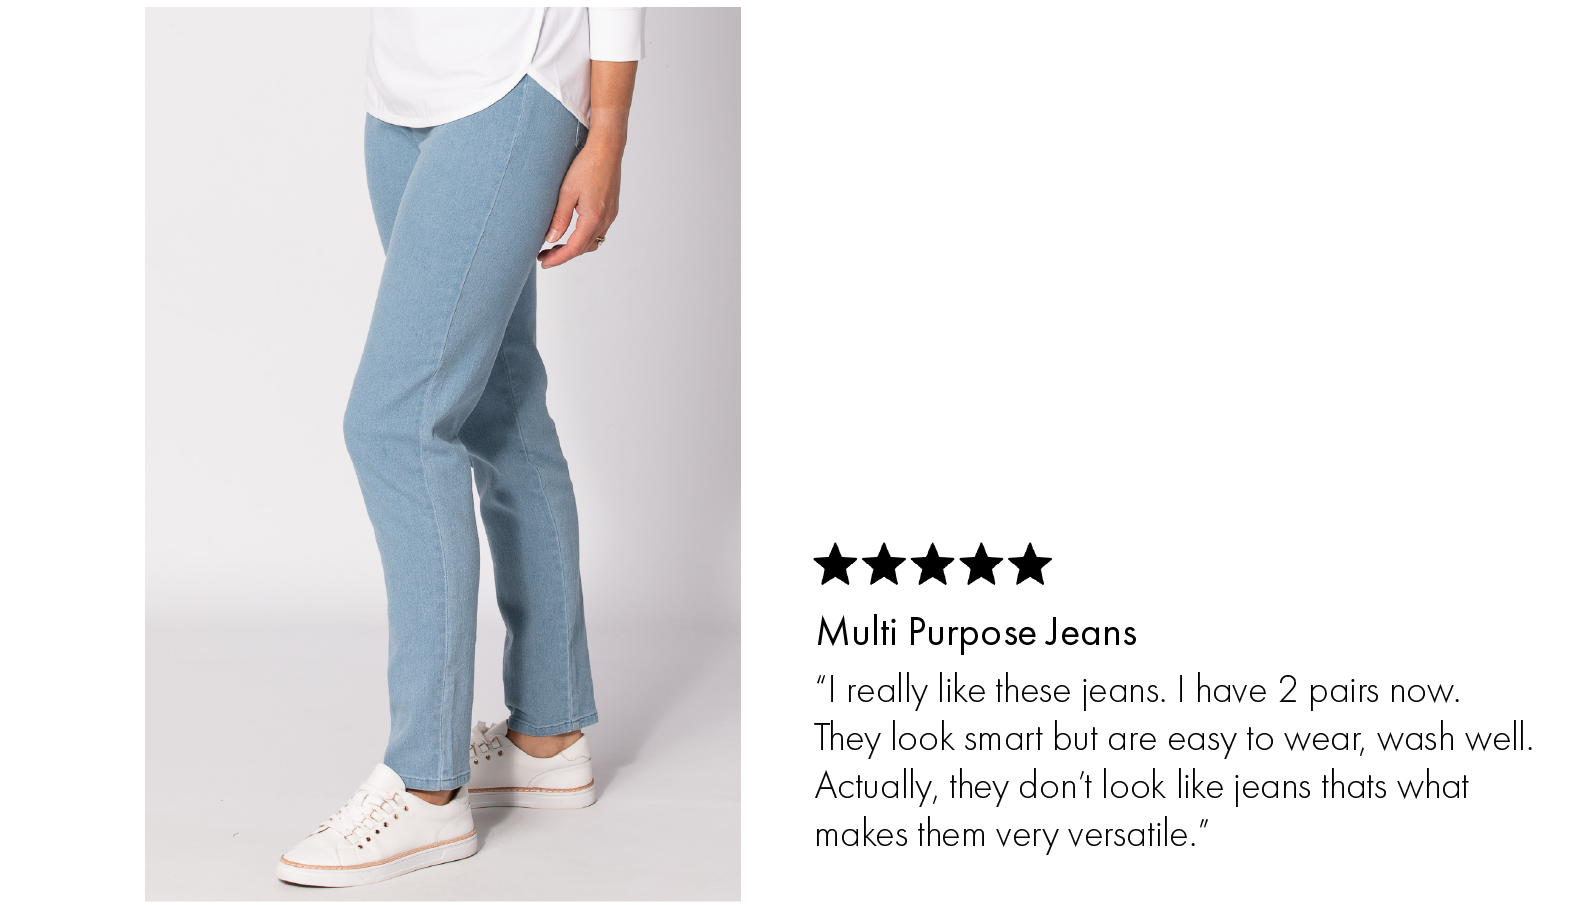 Our popular multi-purpose jeans, the Suzy Stretch Pull On Jeans